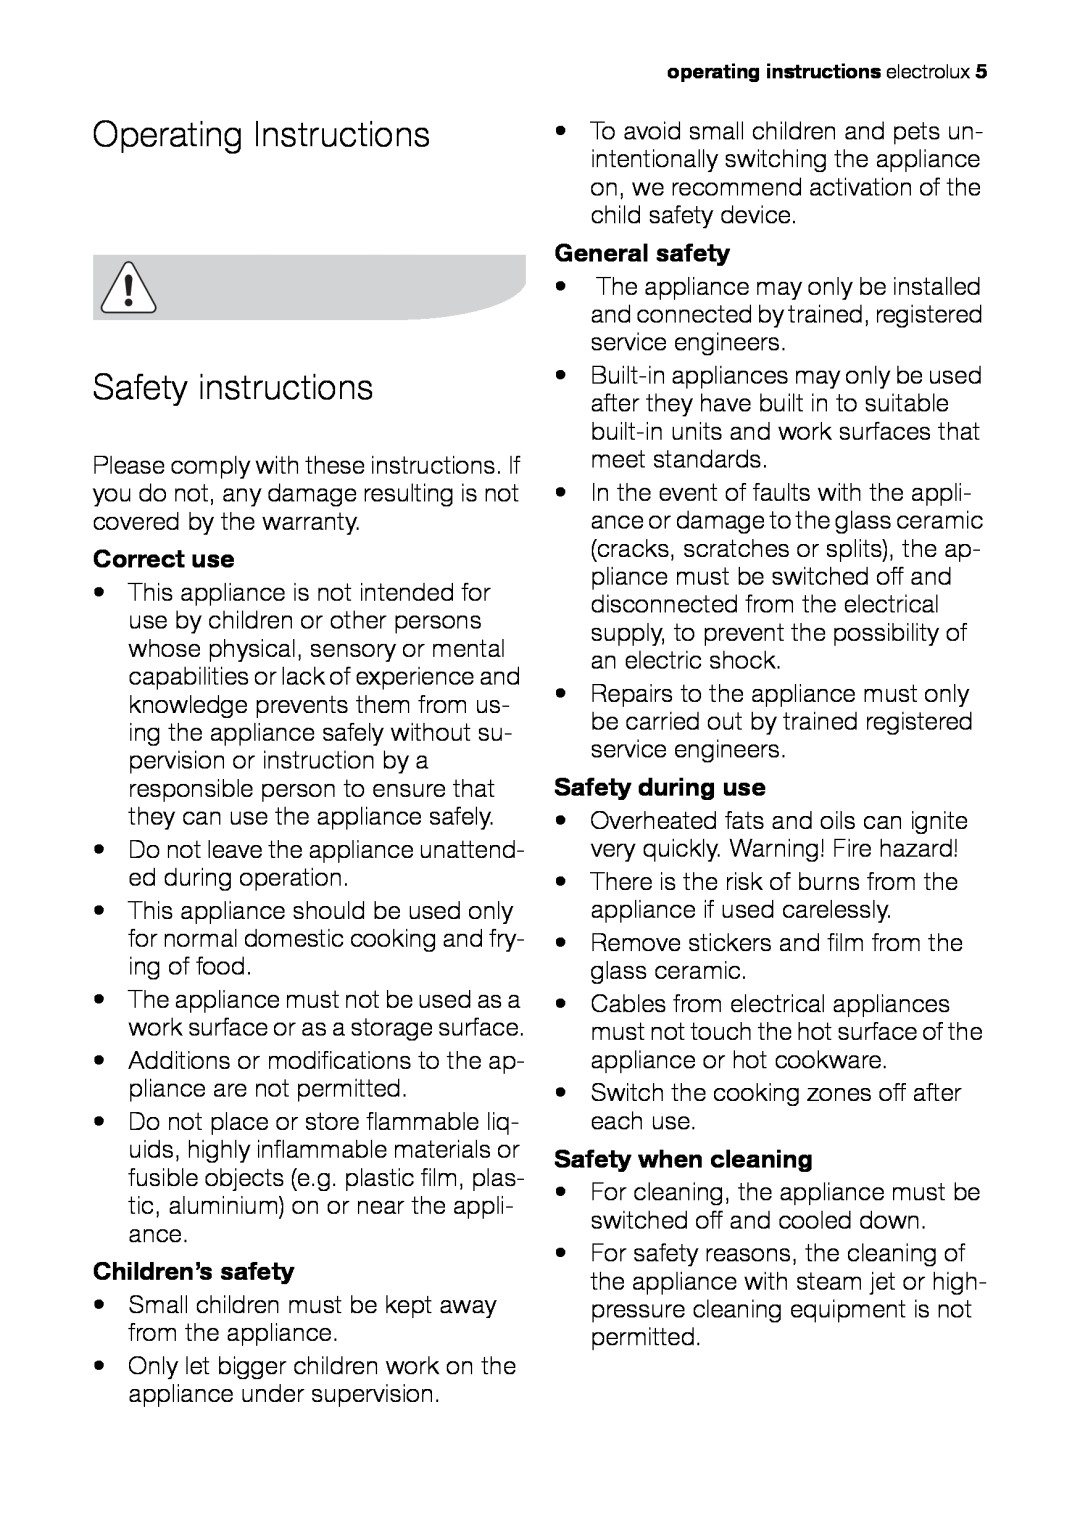 Electrolux EHS 36020 U Operating Instructions Safety instructions, Correct use, Children’s safety, General safety 